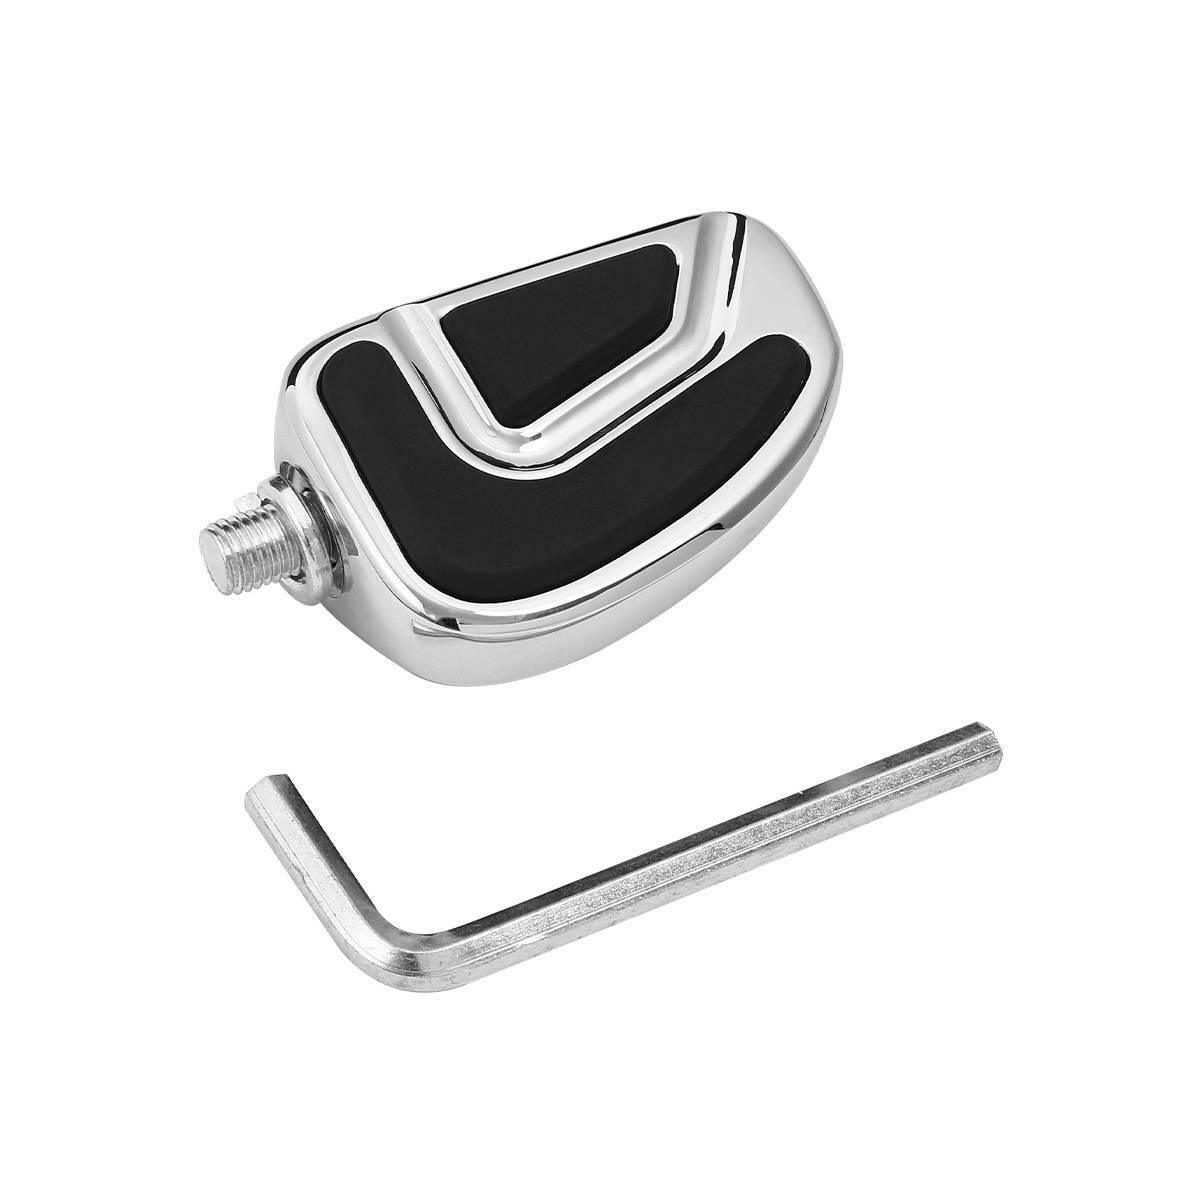 Chrome Airflow Shifter Foot Peg Fit For Harley Road Glide Softail Fat Boy Bob - Moto Life Products